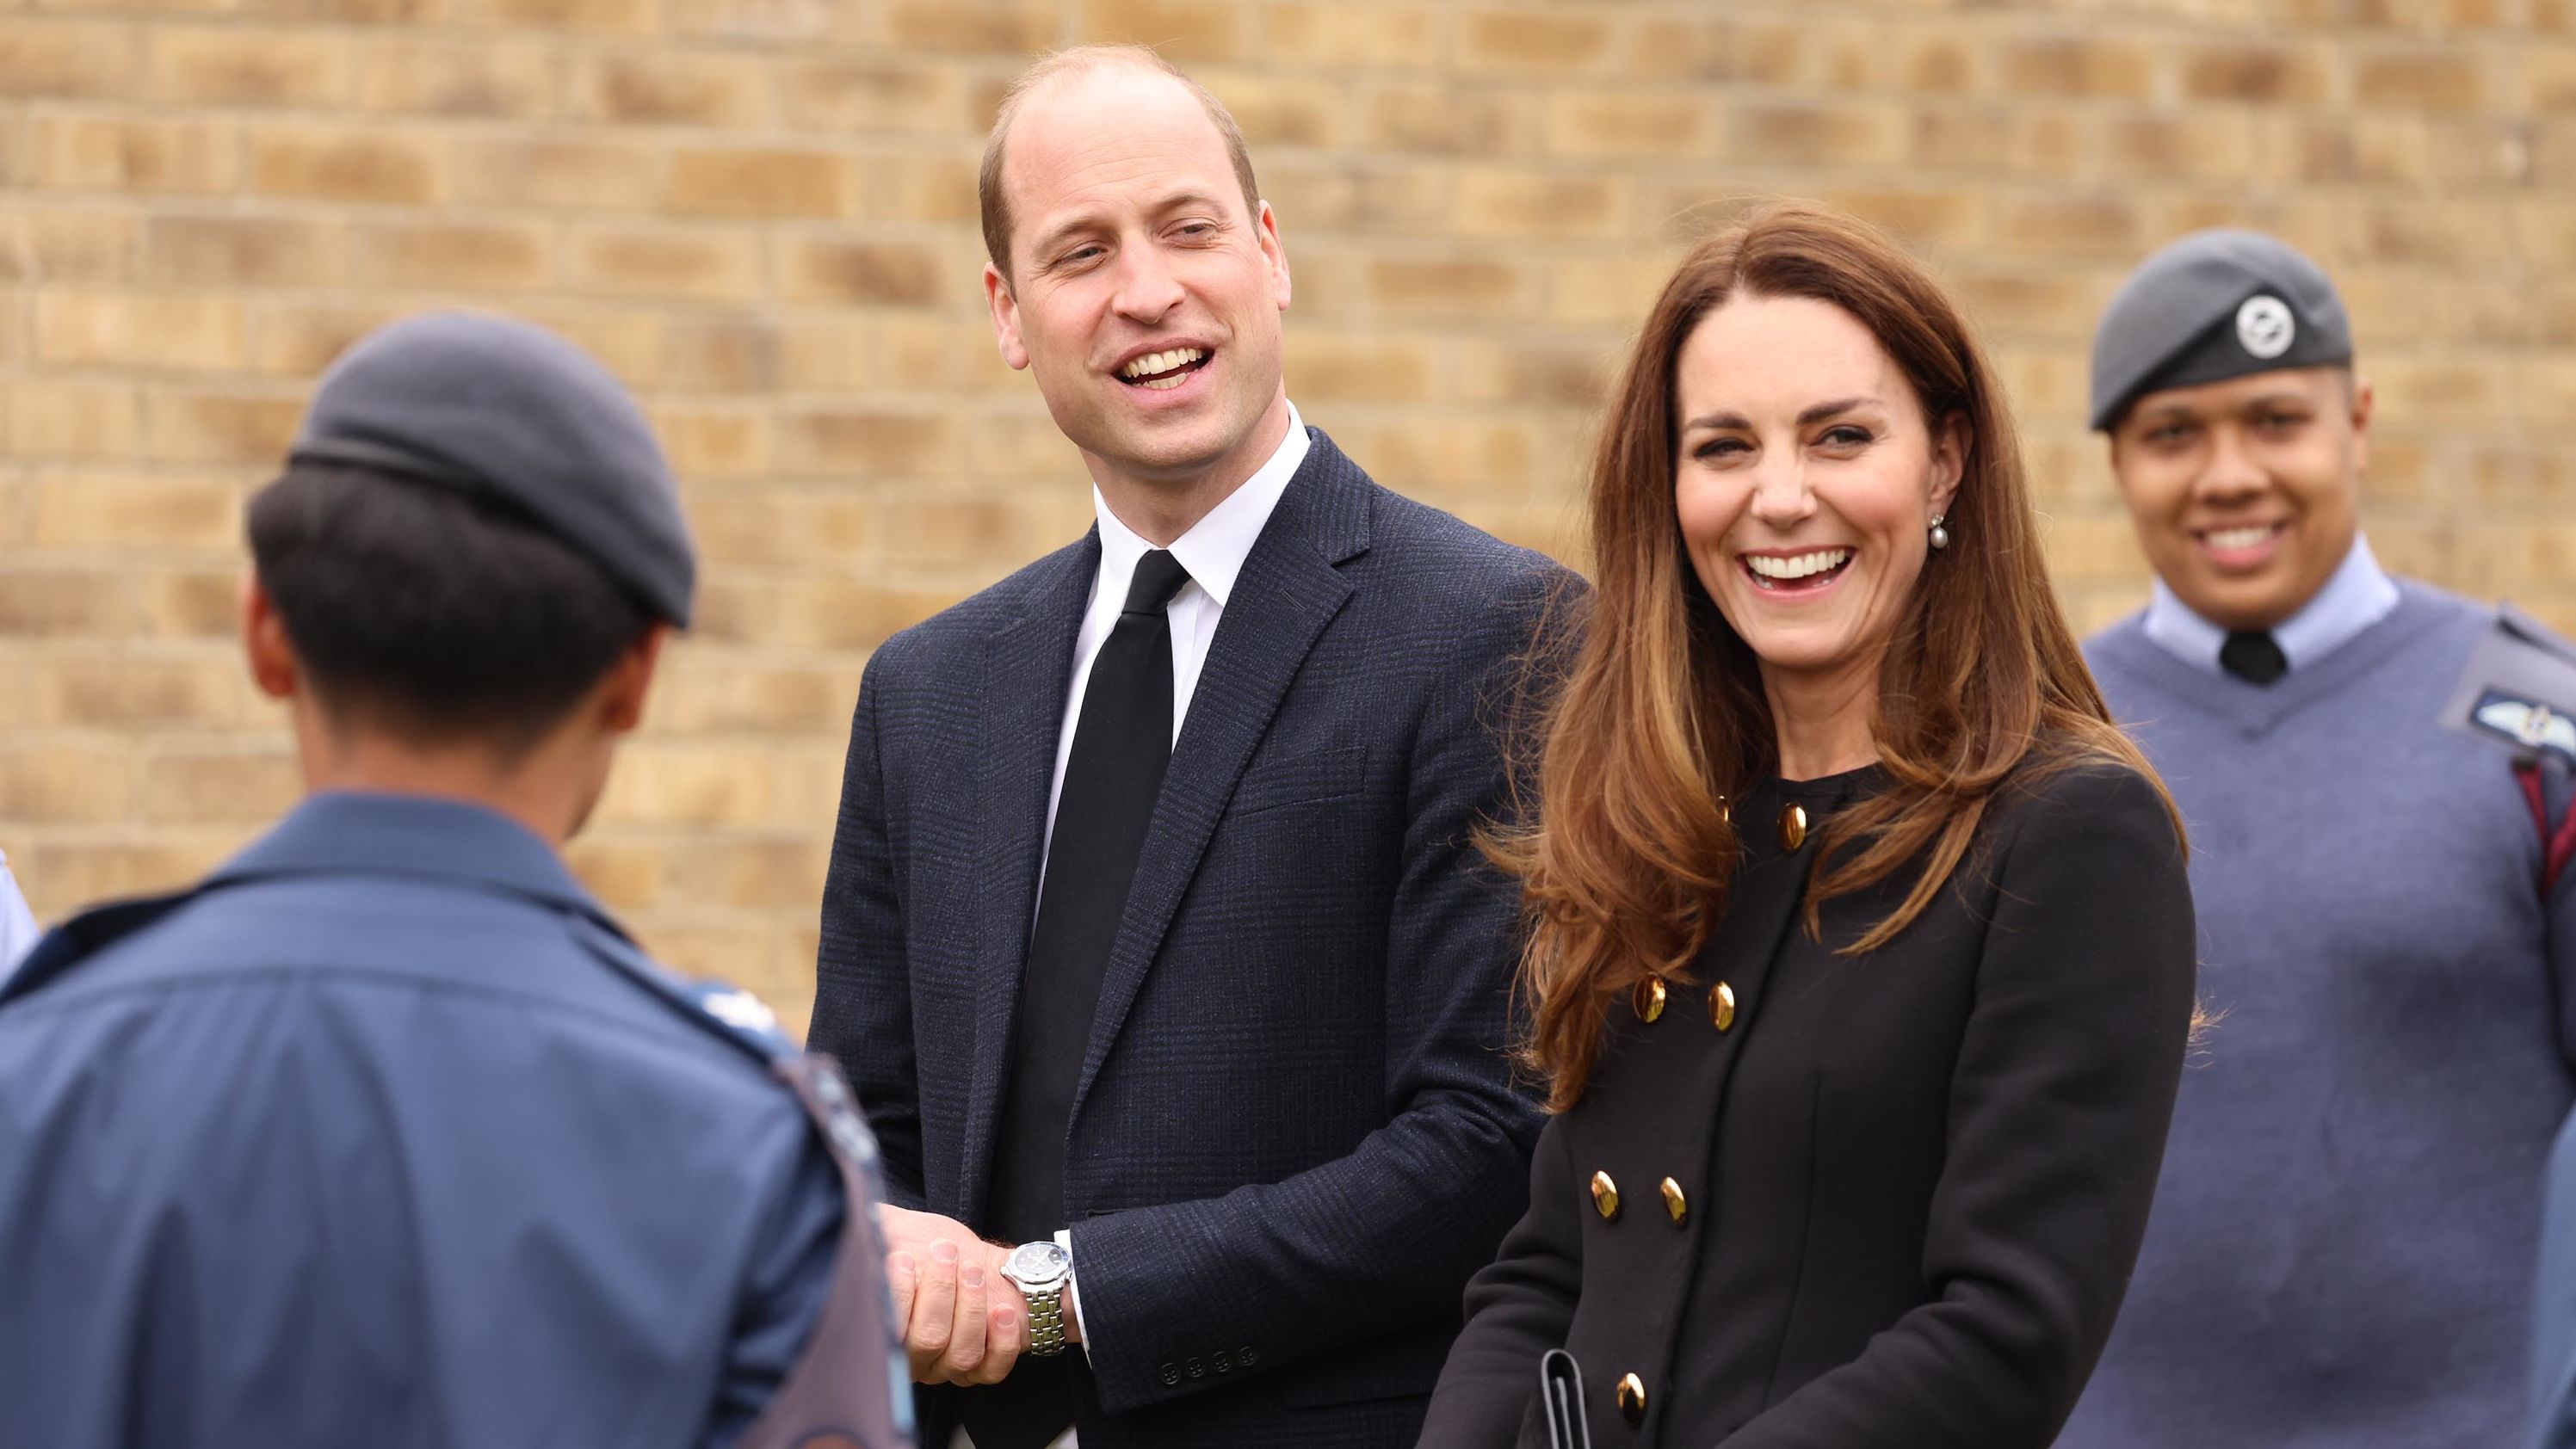 William and Catherine visit an air squadron in London in April 2021. During the visit, the squadron paid tribute to William's late grandfather, <a href="http://www.cnn.com/2021/04/09/world/gallery/prince-philip/index.html" target="_blank">Prince Philip</a>, who served as Air Commodore-in-Chief of the Air Training Corps for 63 years.